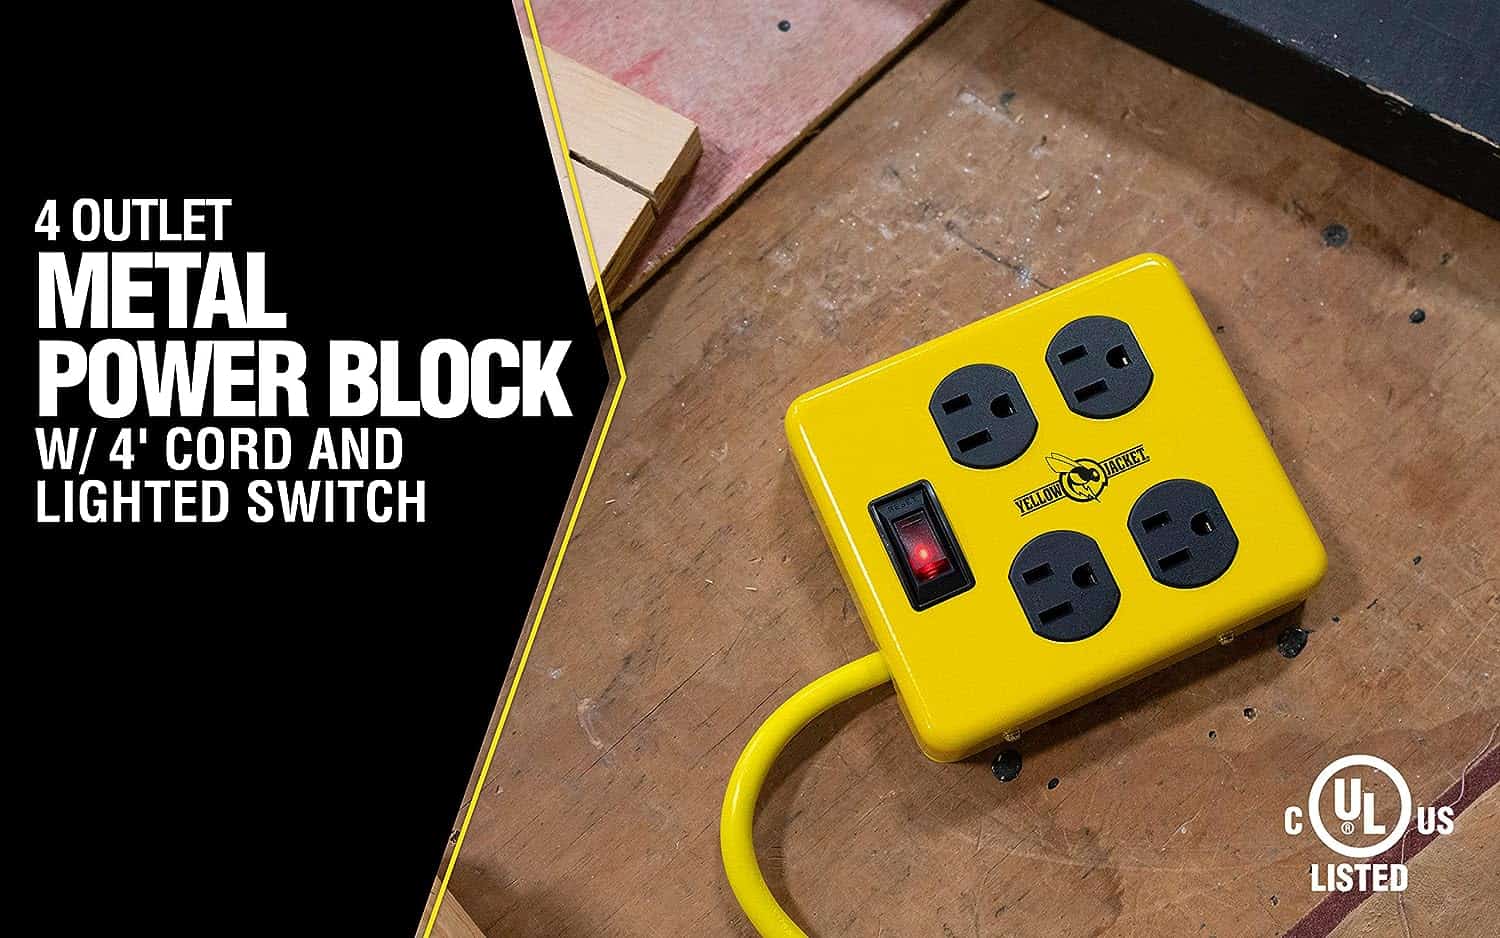 Yellow Jacket 2177N Metal Power Block with 4 Outlets and Lighted Switch 4-foot Cord 2